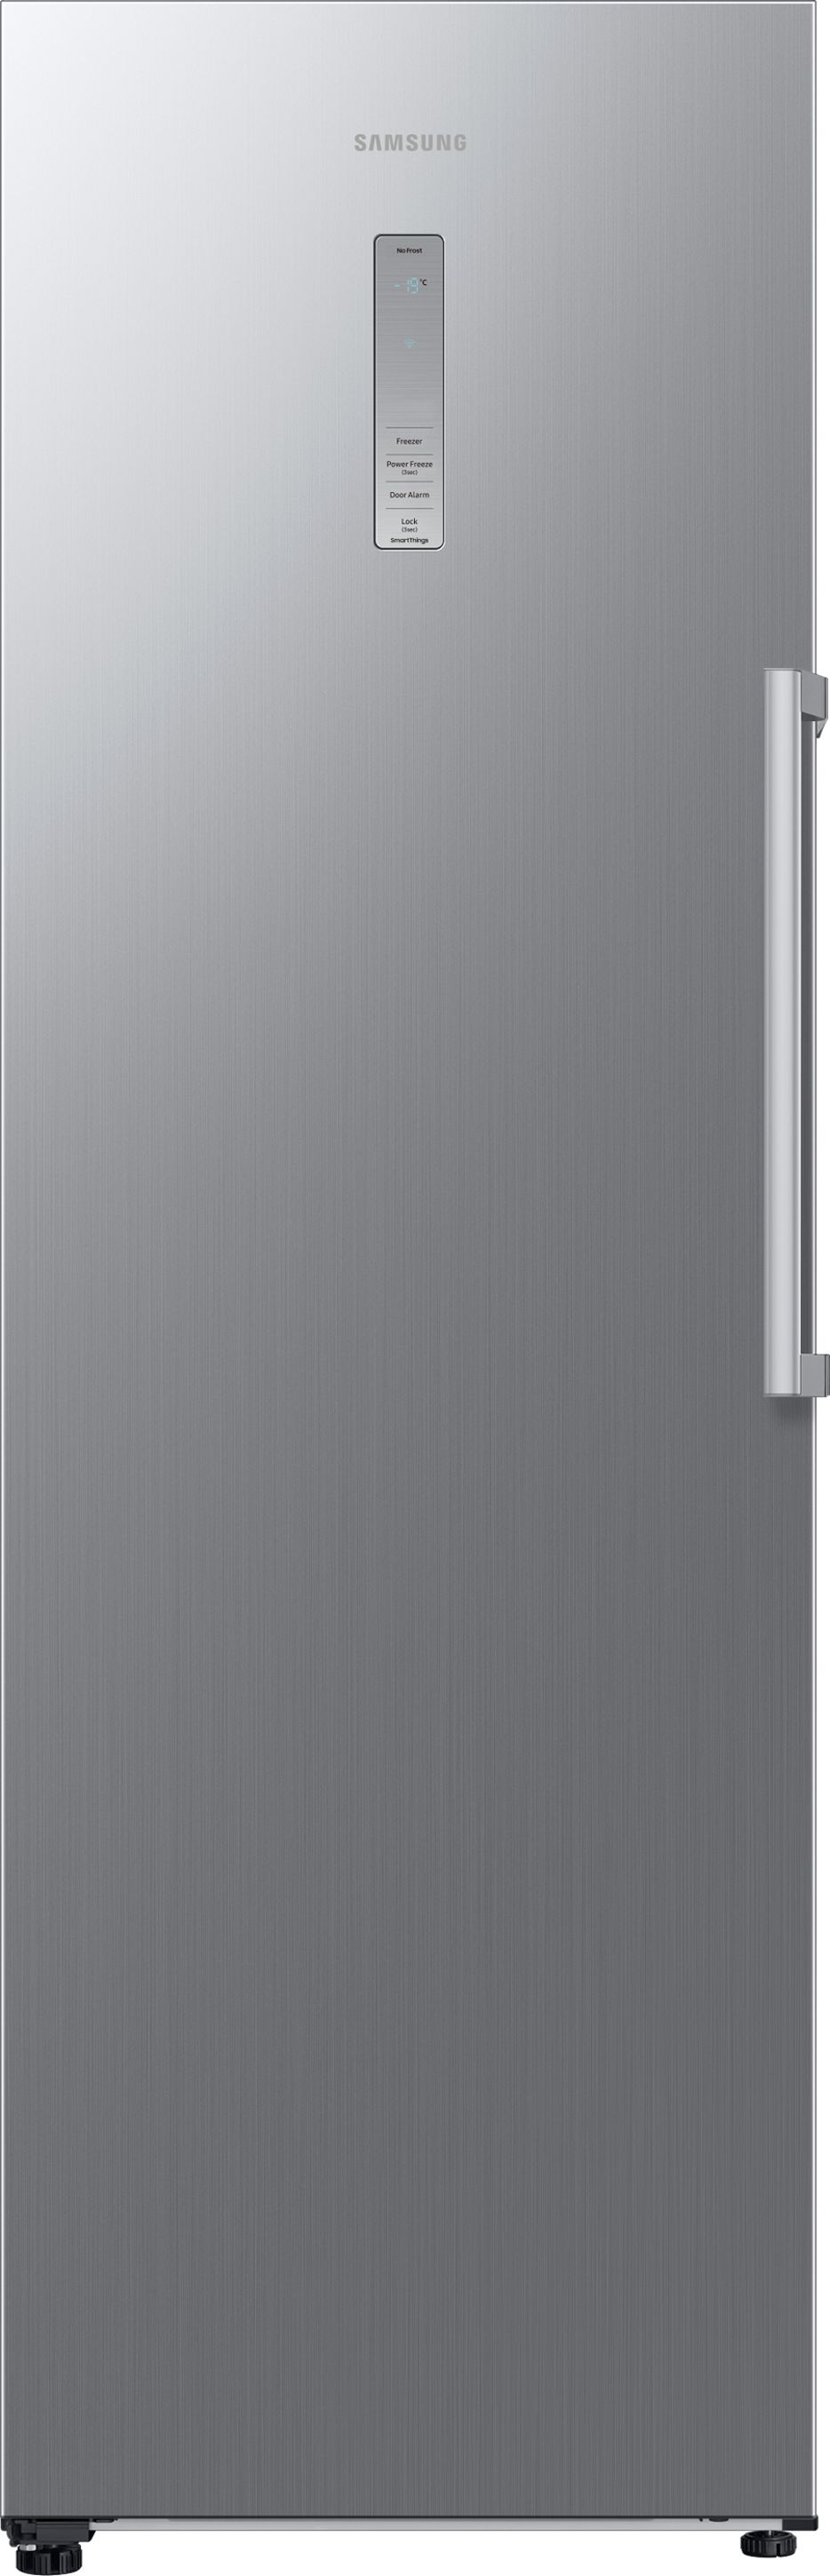 FNS 4382 E Miele Free-standing Freezer in Stainless steel effect